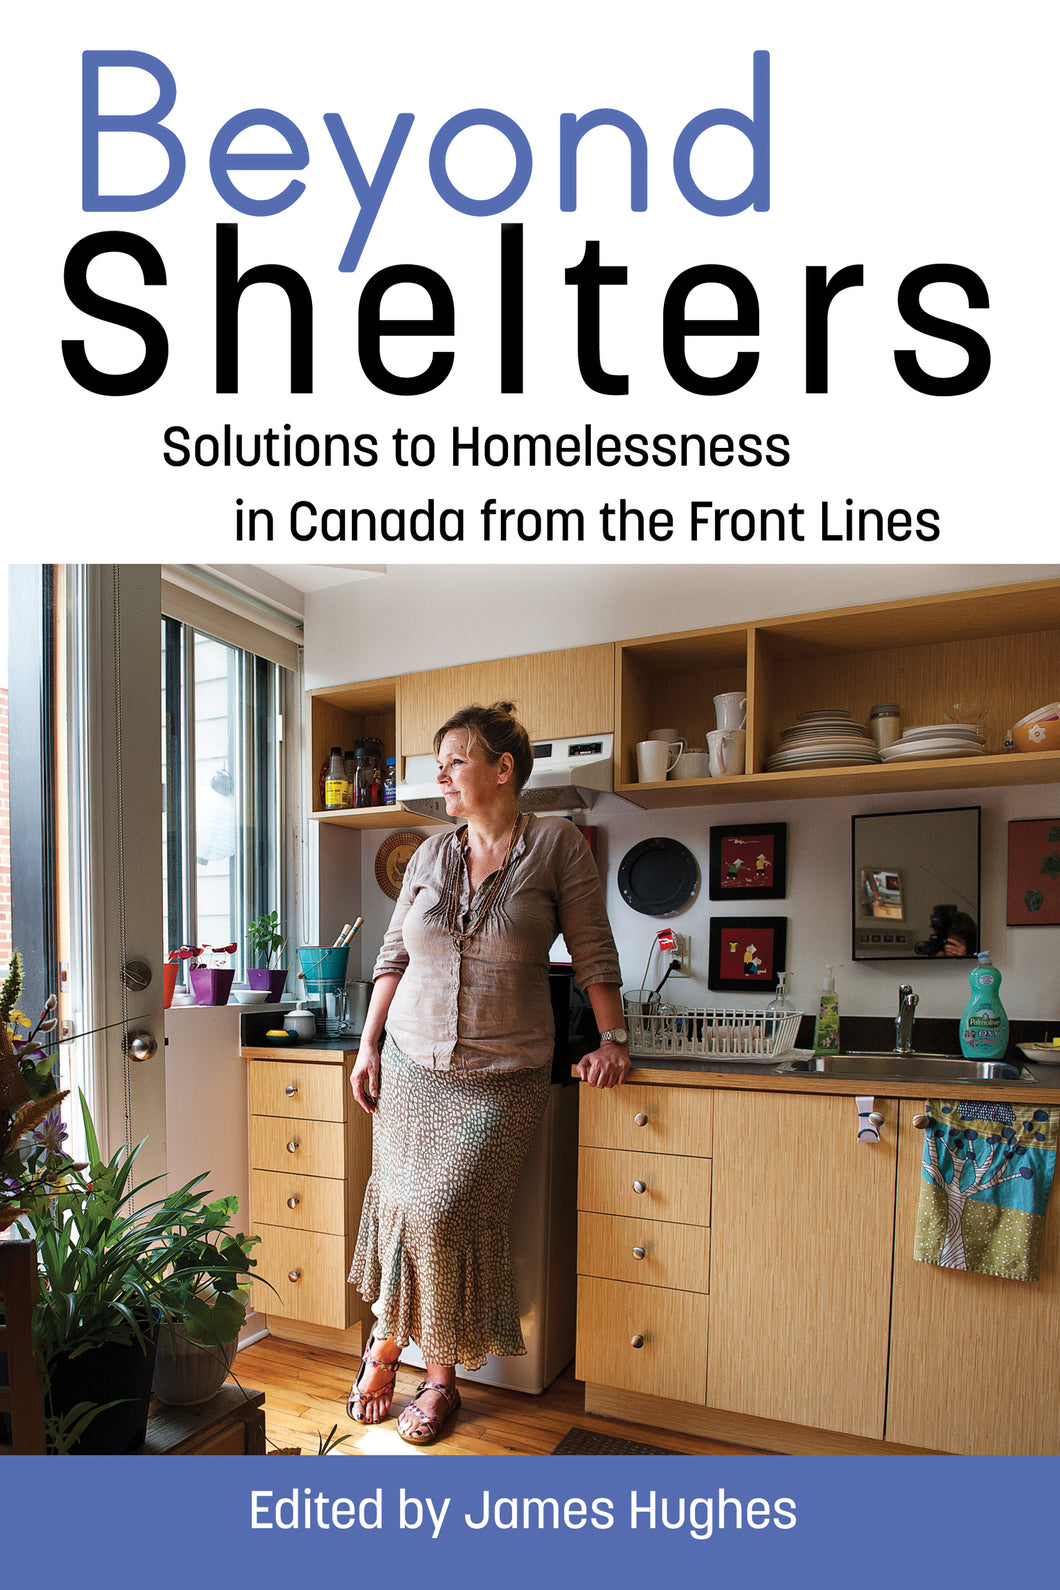 Beyond Shelters